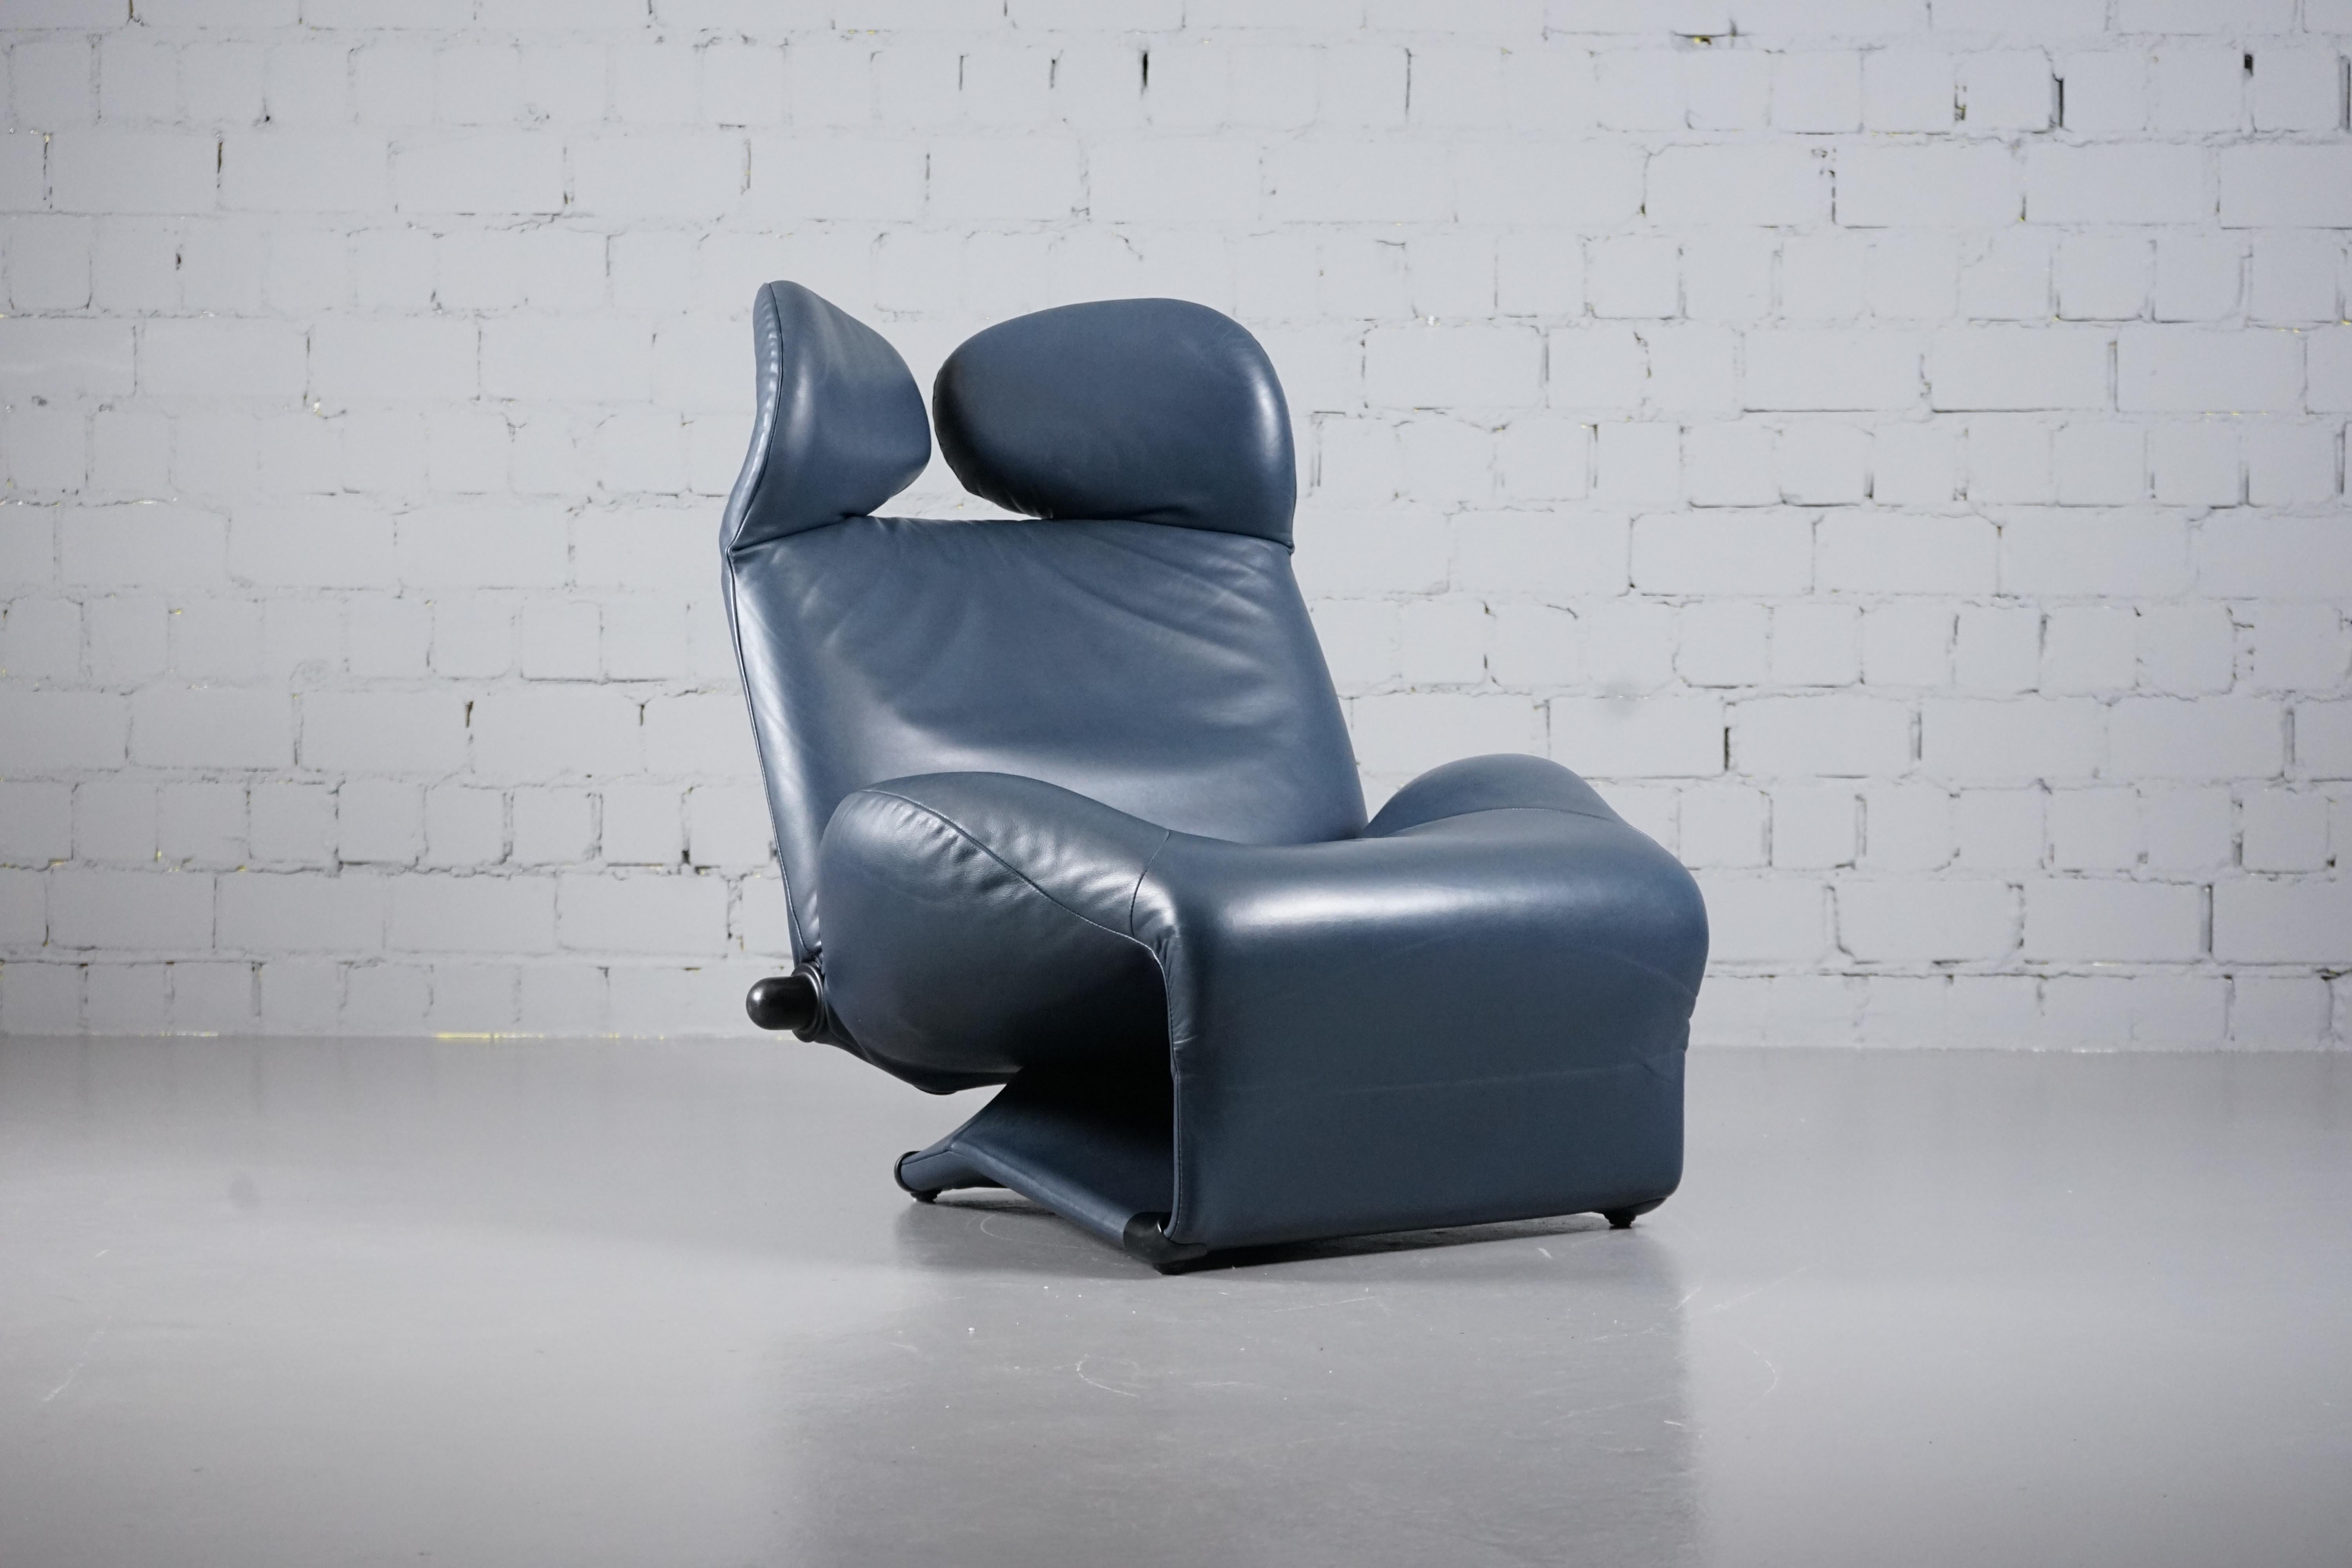 Grey-Blue Leather Wink Lounge Chair by Toshiyuki Kita for Cassina, 1980s For Sale 7